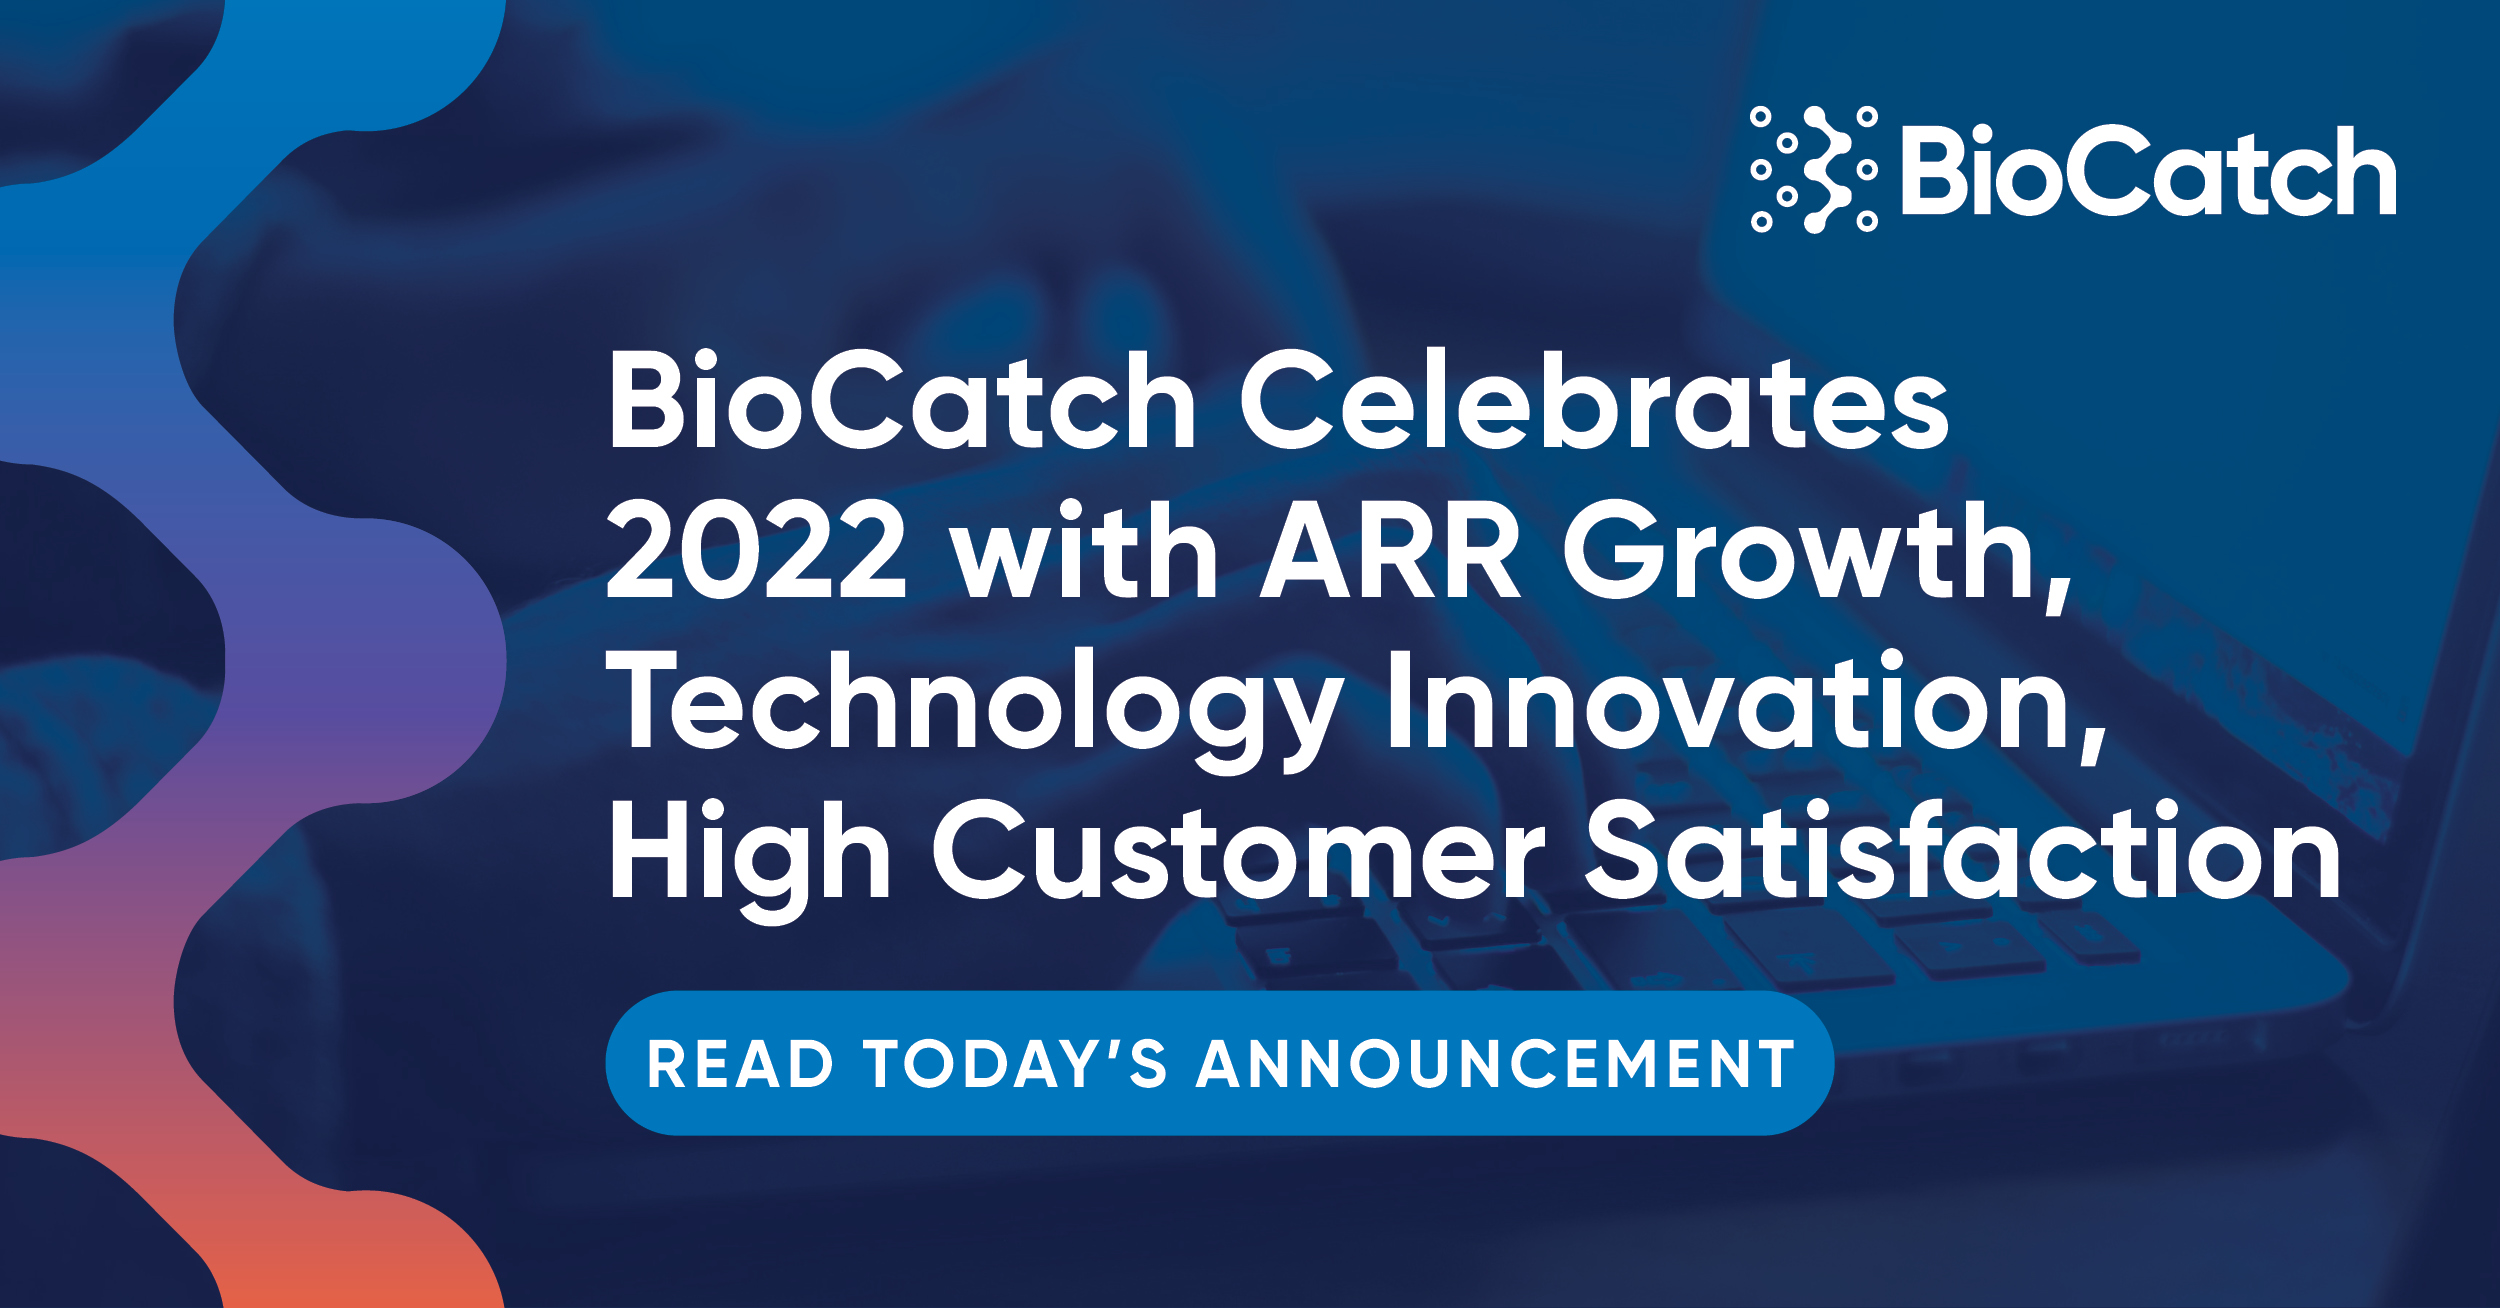 BioCatch Celebrates 2022 with ARR Growth, Technology Innovation, High Customer Satisfaction